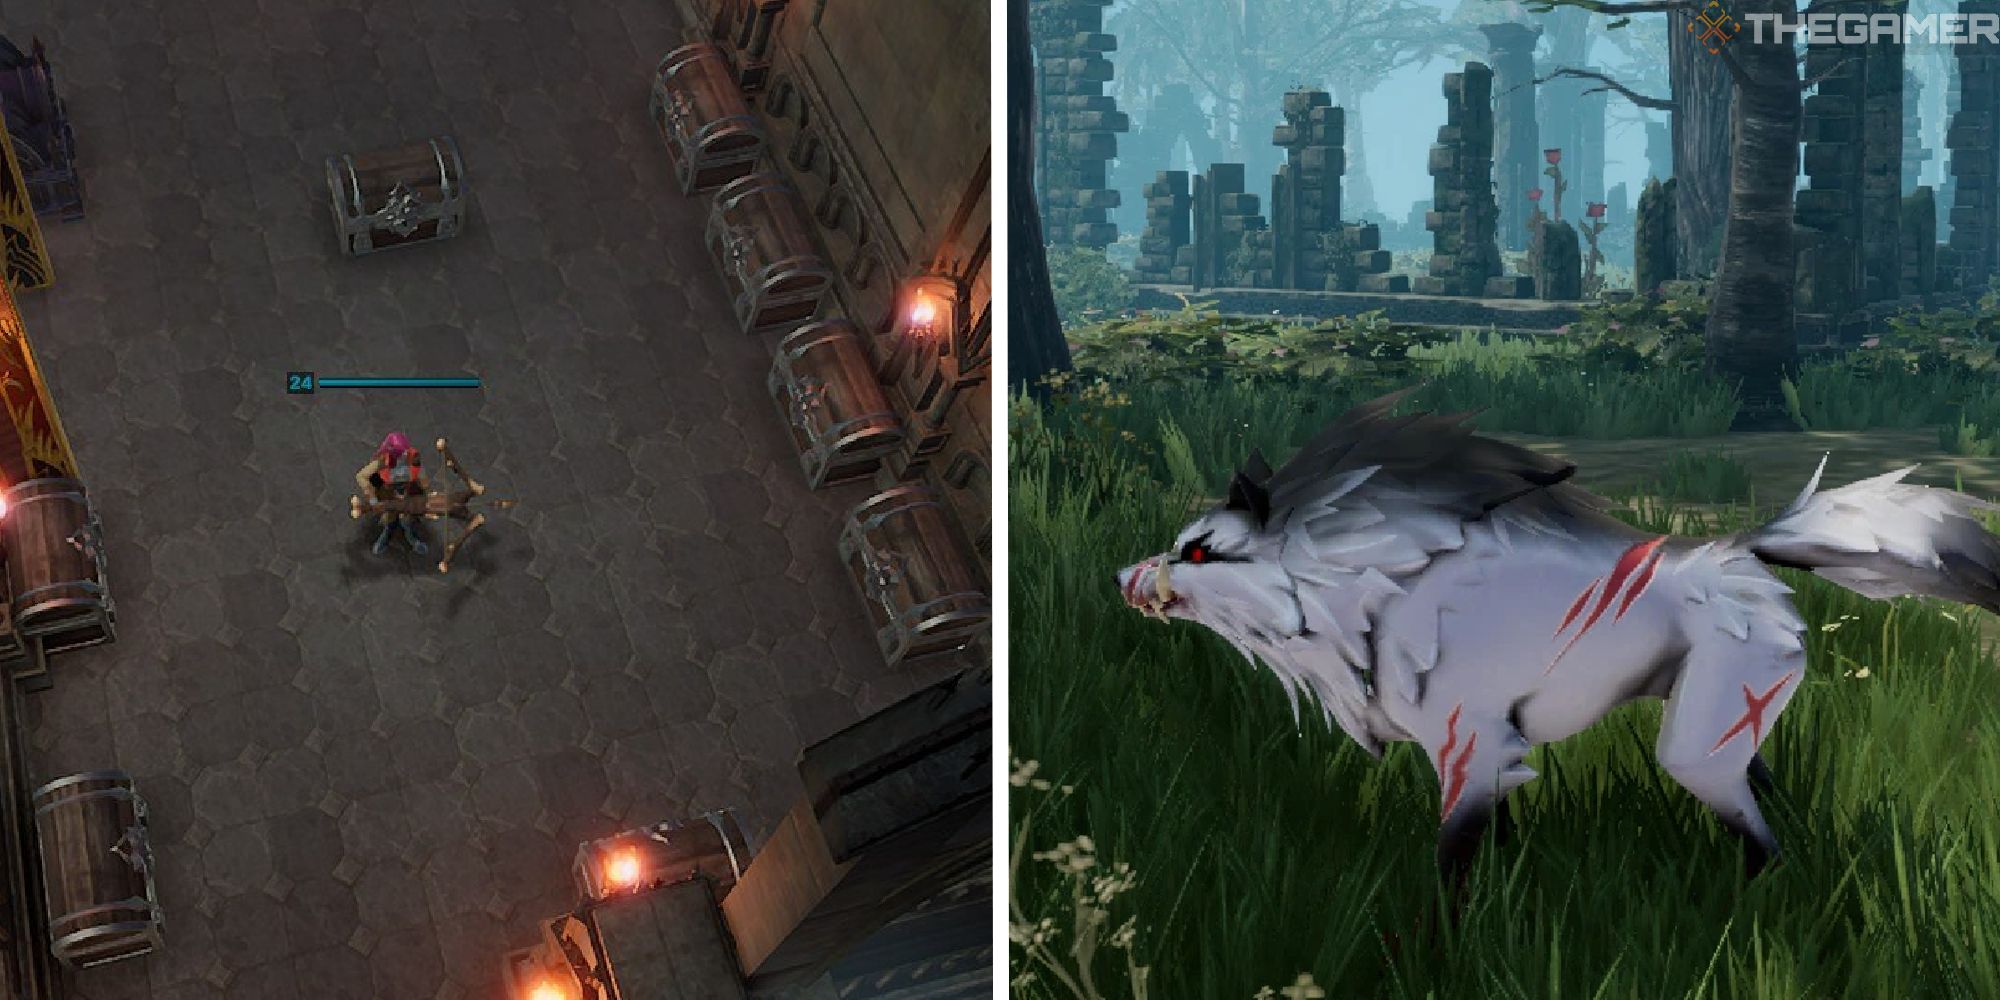 split image showing player in storage room next to image of alpha wolf form